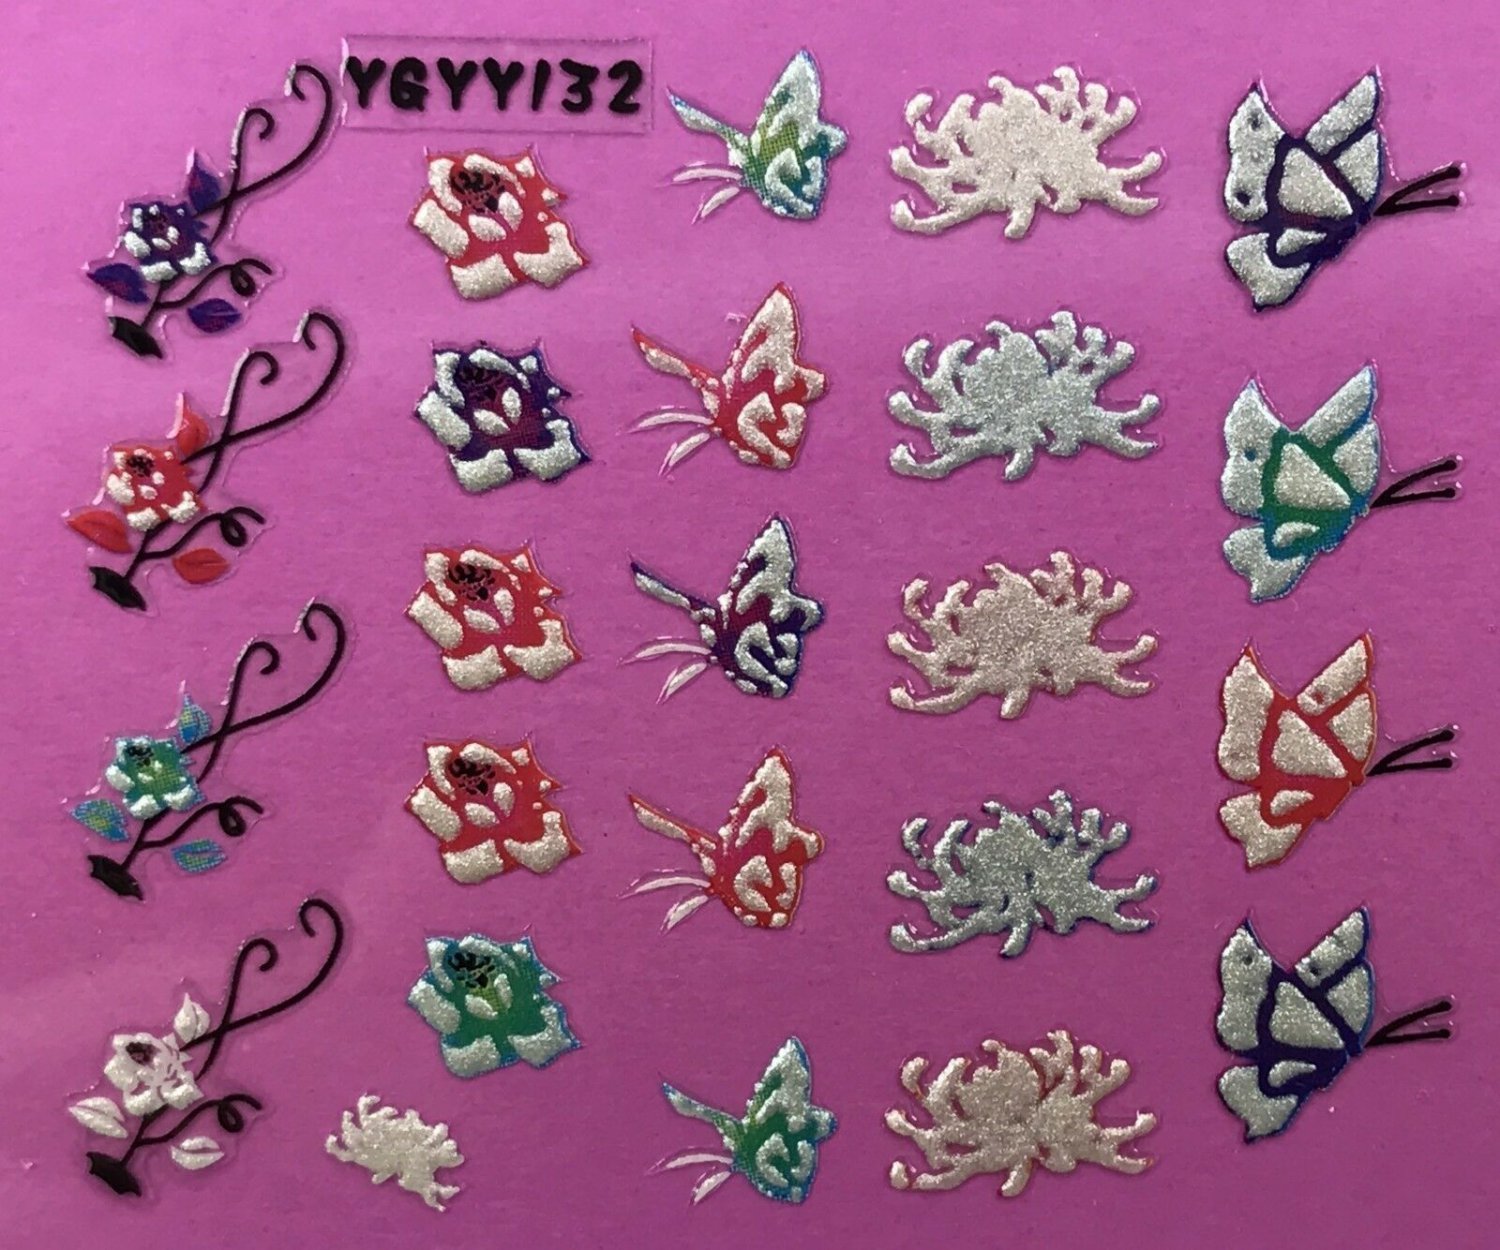 TM Nail Art 3D Decal Stickers Pearlescent Butterflies & Flowers YGYY132